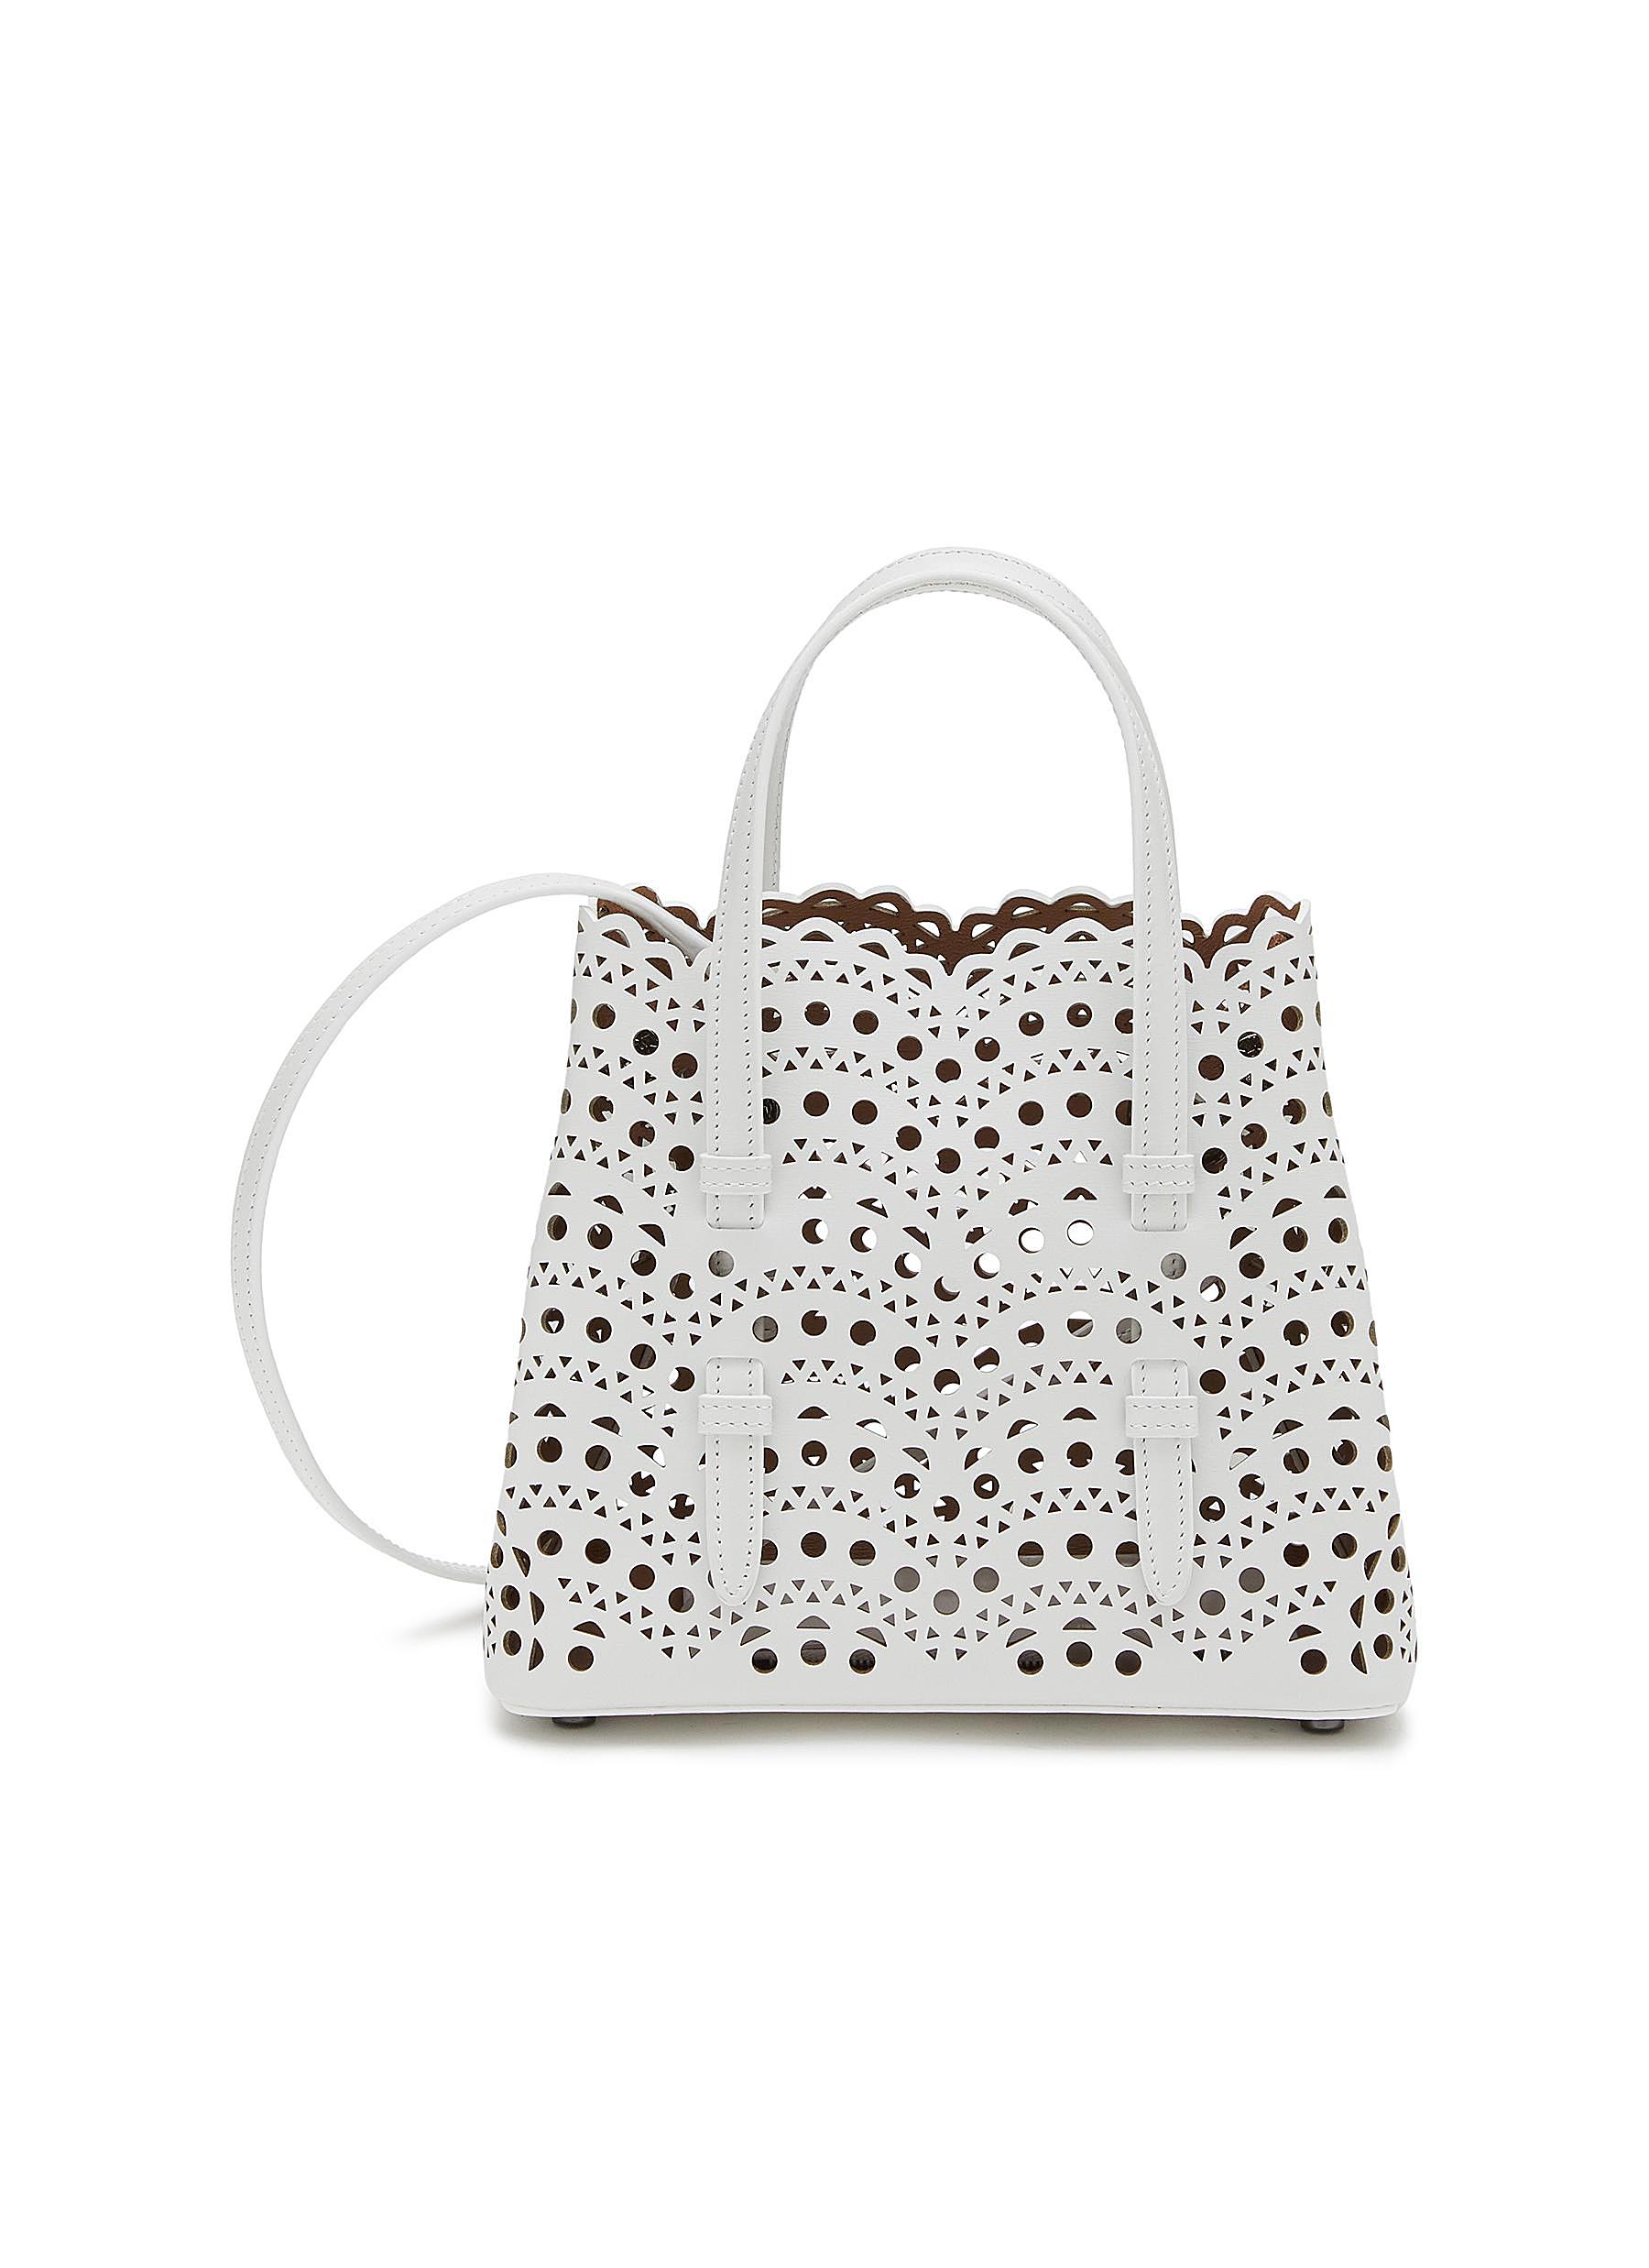 Mina 20 Perforated Leather Tote Bag